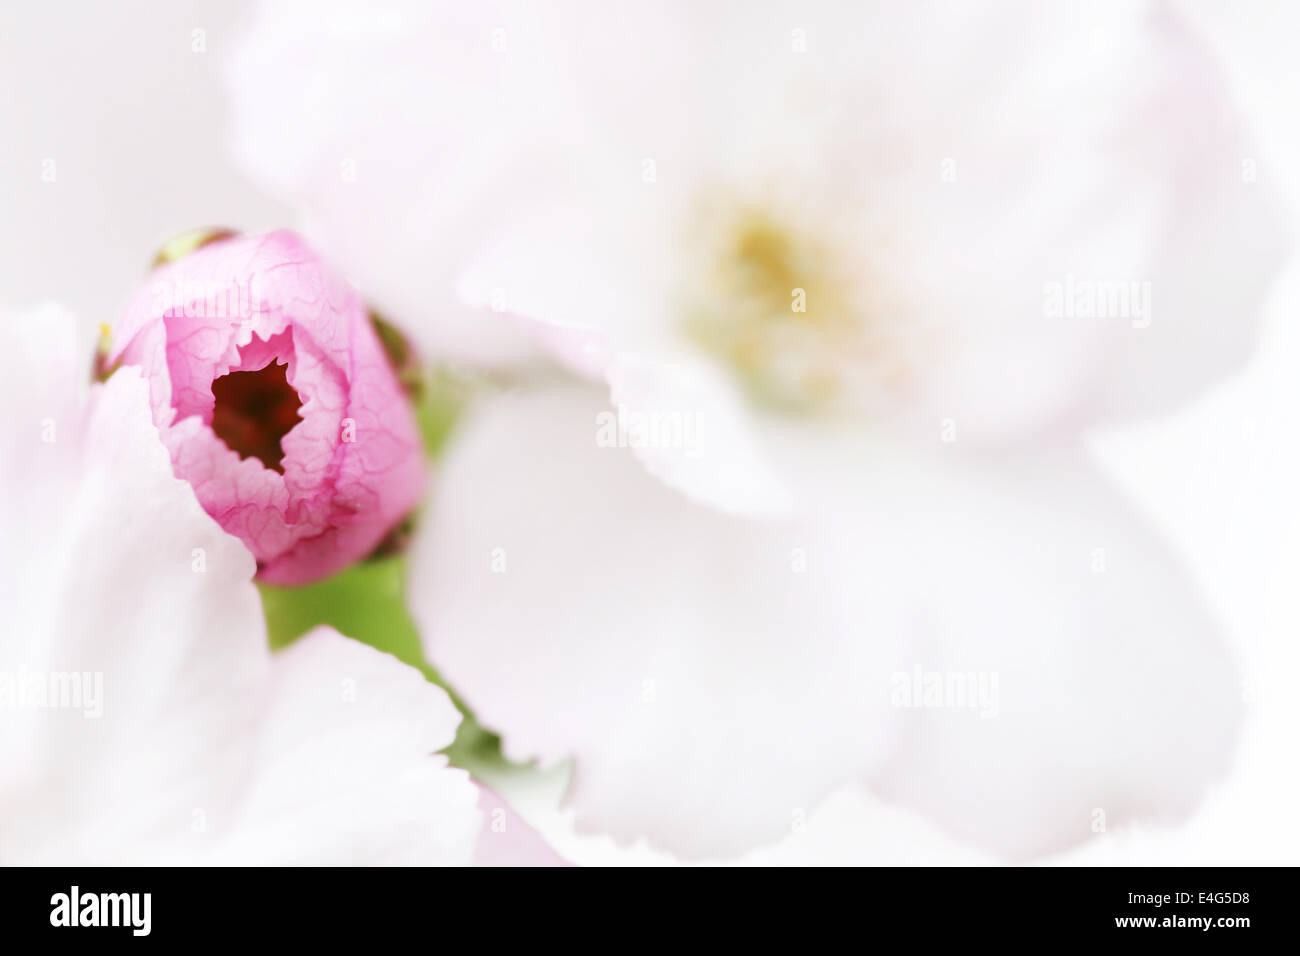 white and pink apple bloom flower Stock Photo